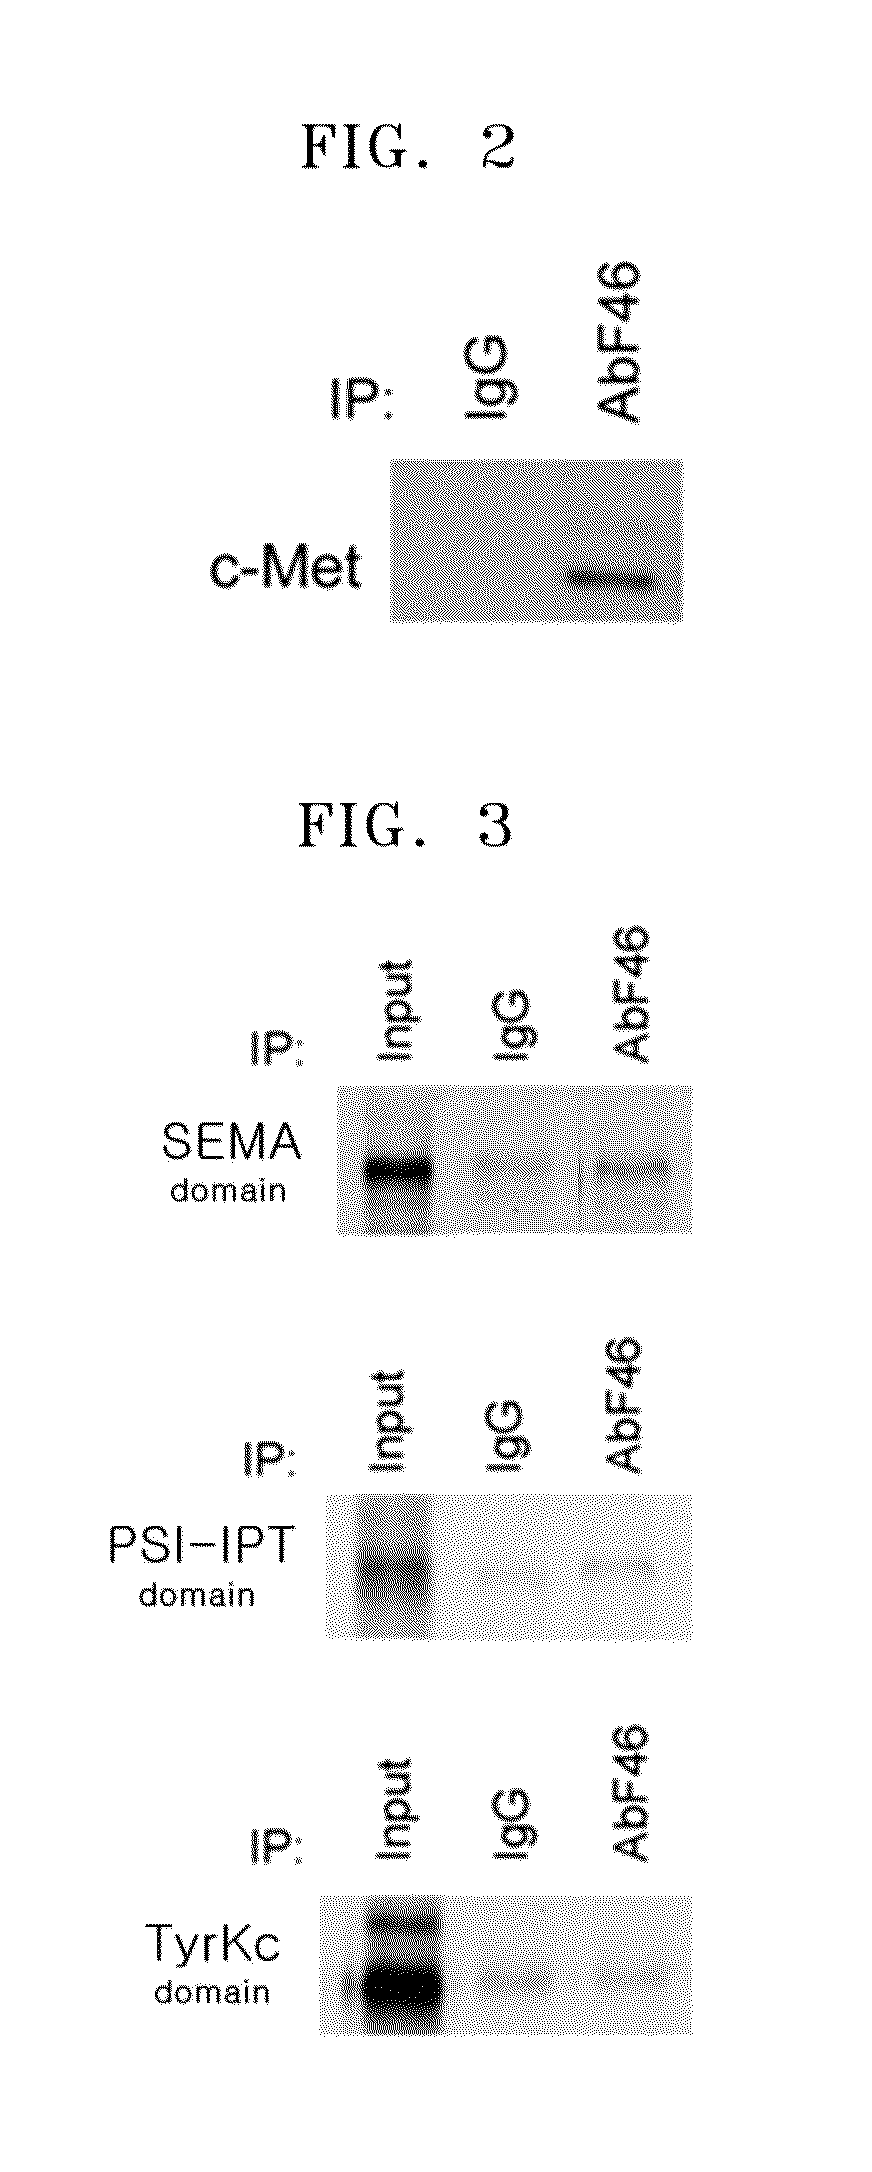 Antibody specifically binding to epitope in SEMA domain of c-Met